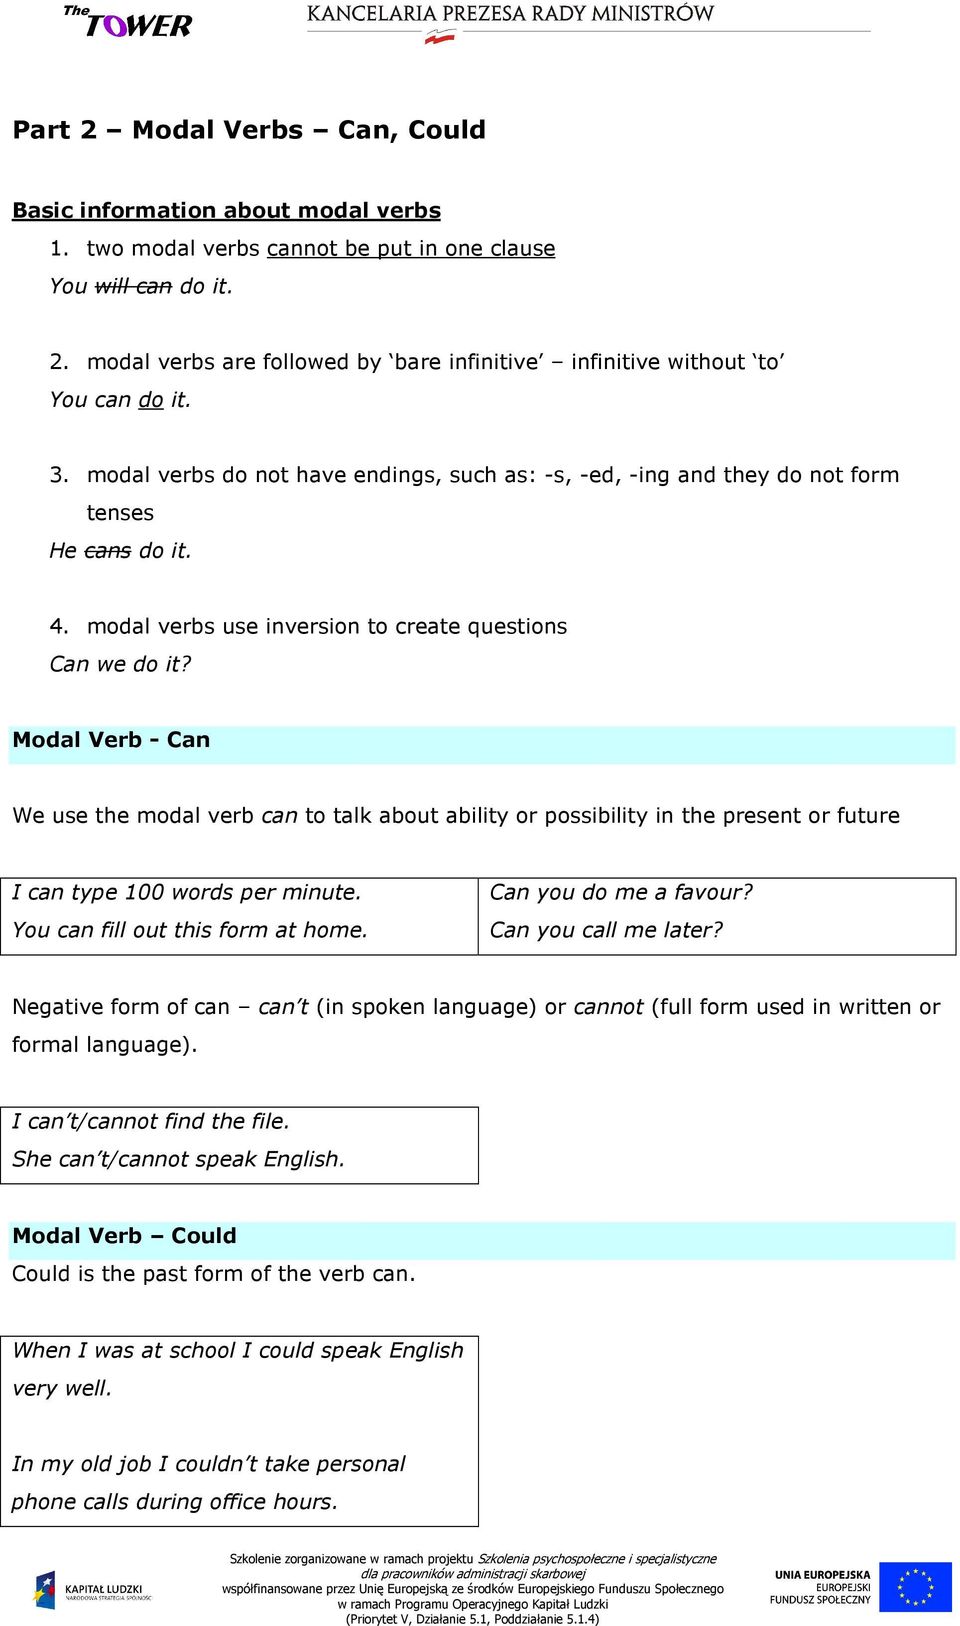 Modal Verb - Can We use the modal verb can to talk about ability or possibility in the present or future I can type 100 words per minute. You can fill out this form at home. Can you do me a favour?